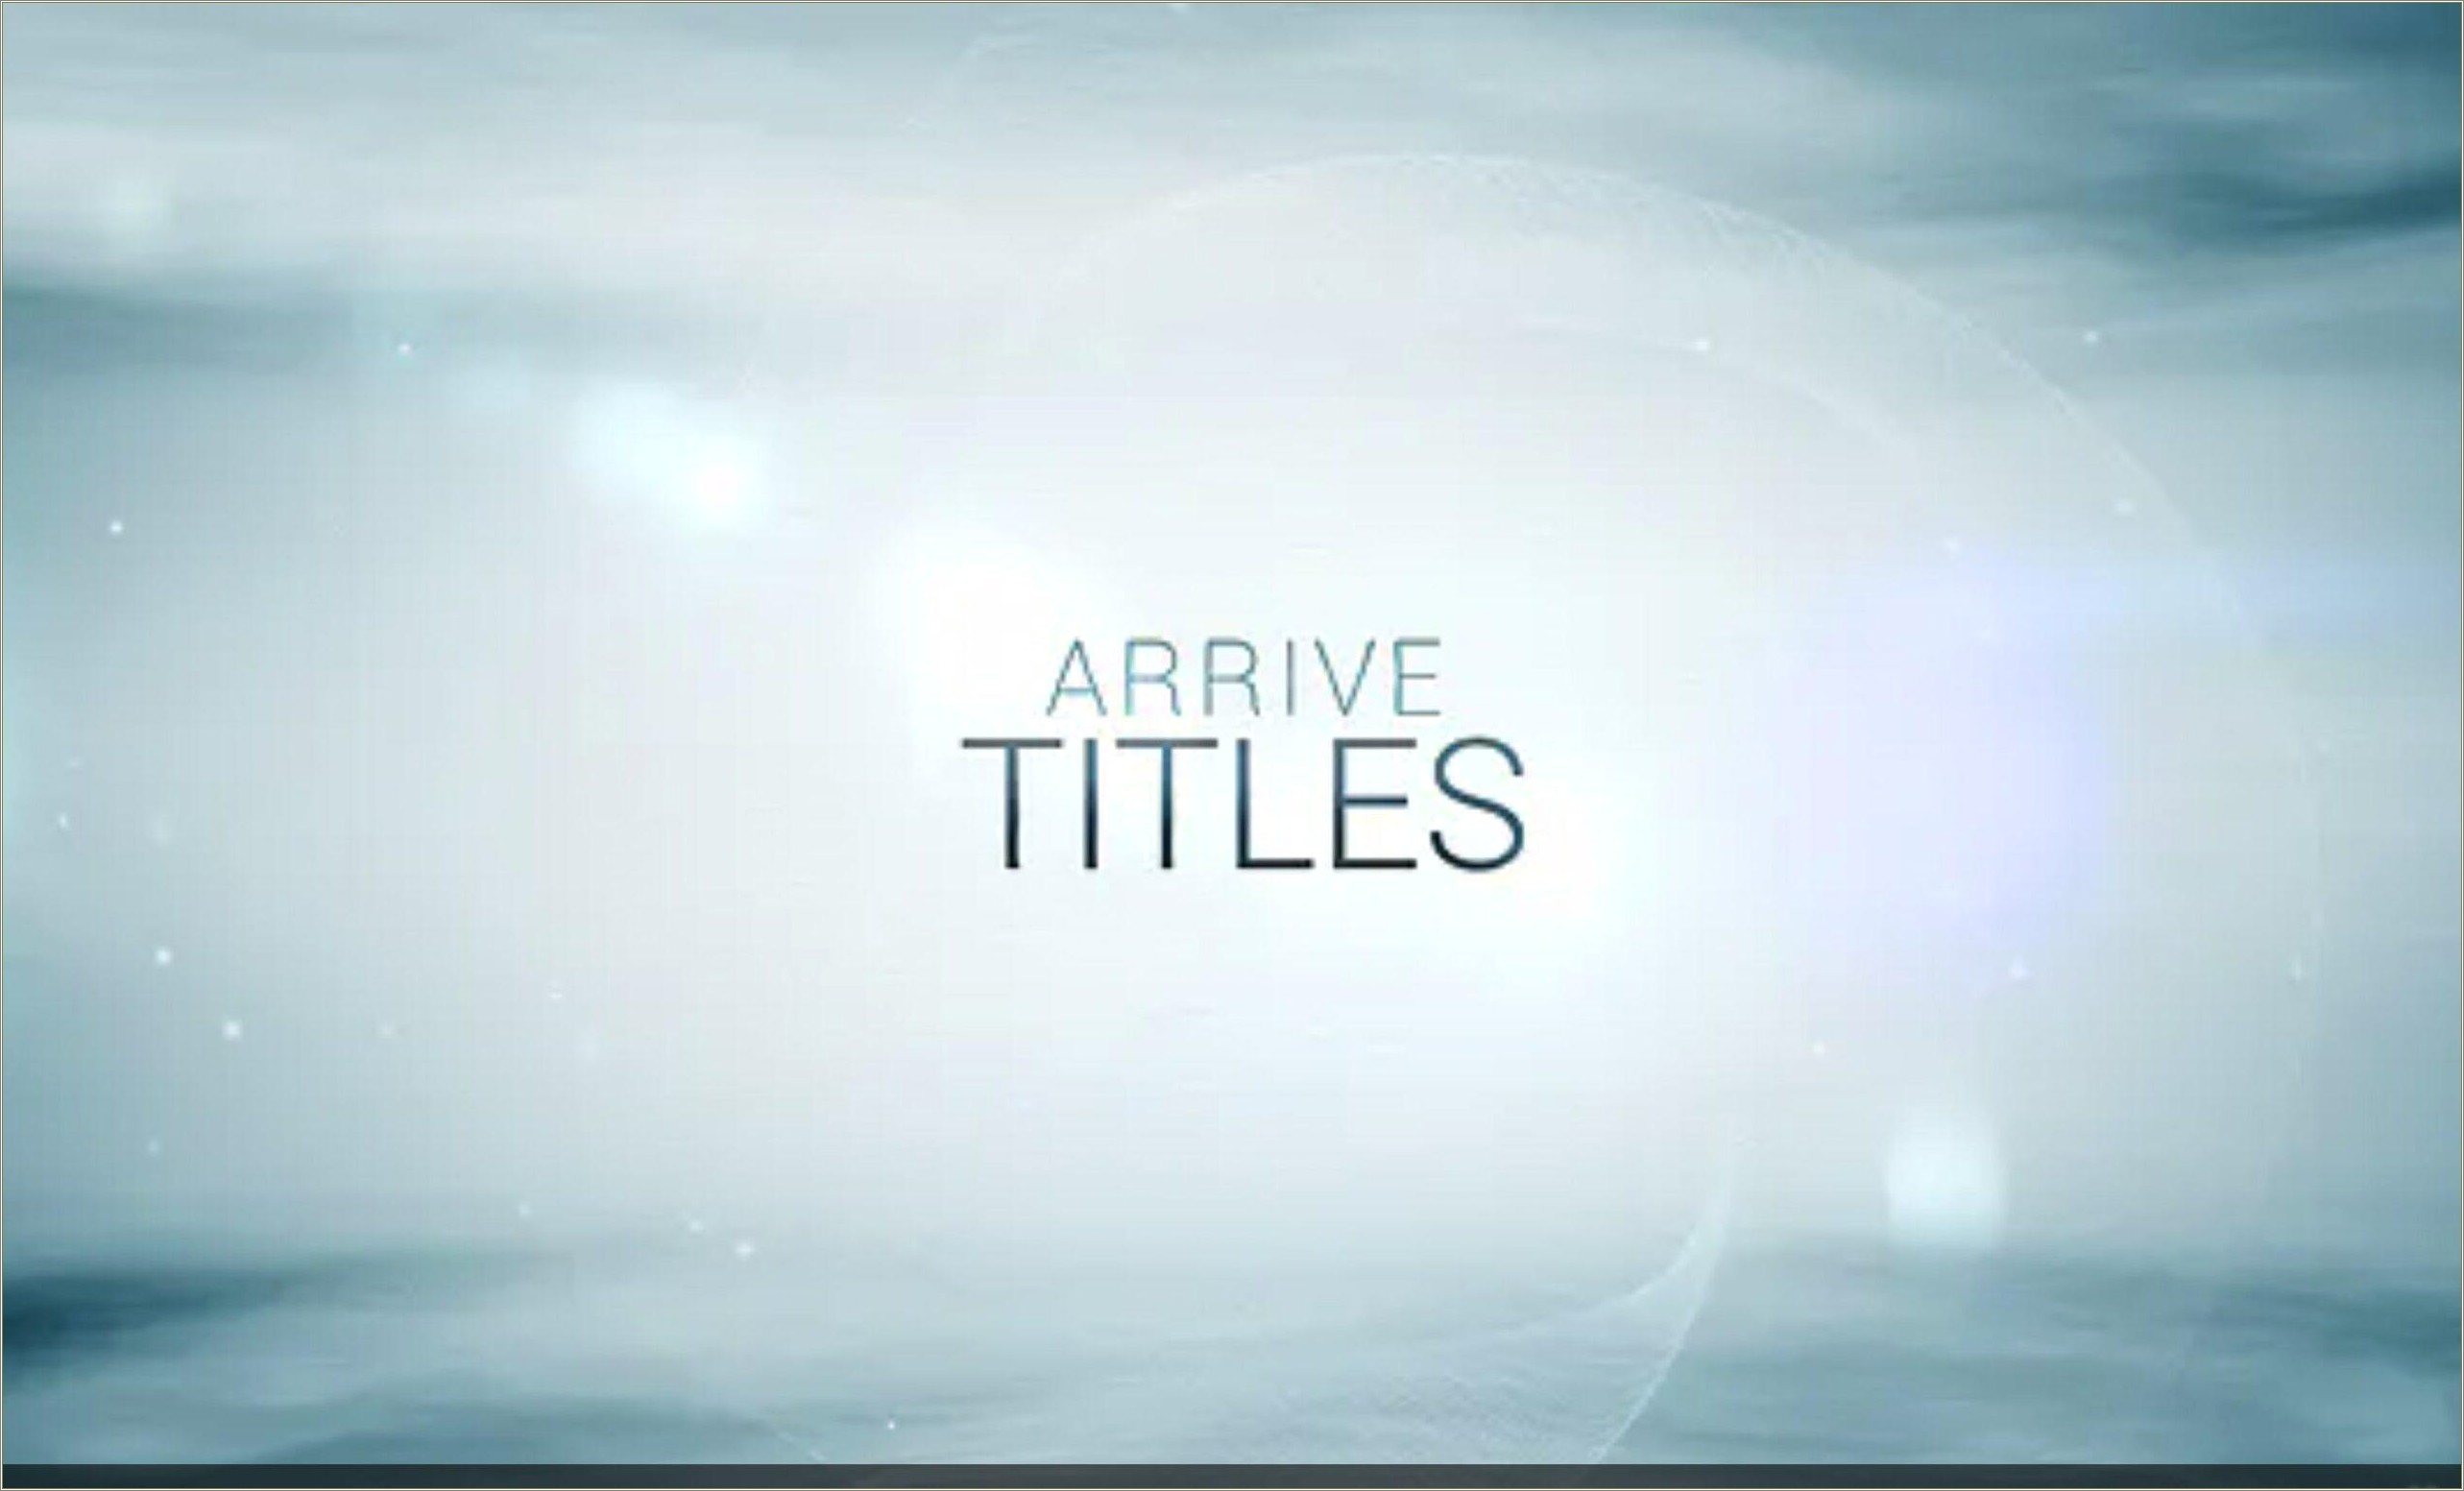 Adobe After Effects Cs5 Title Templates Free Download